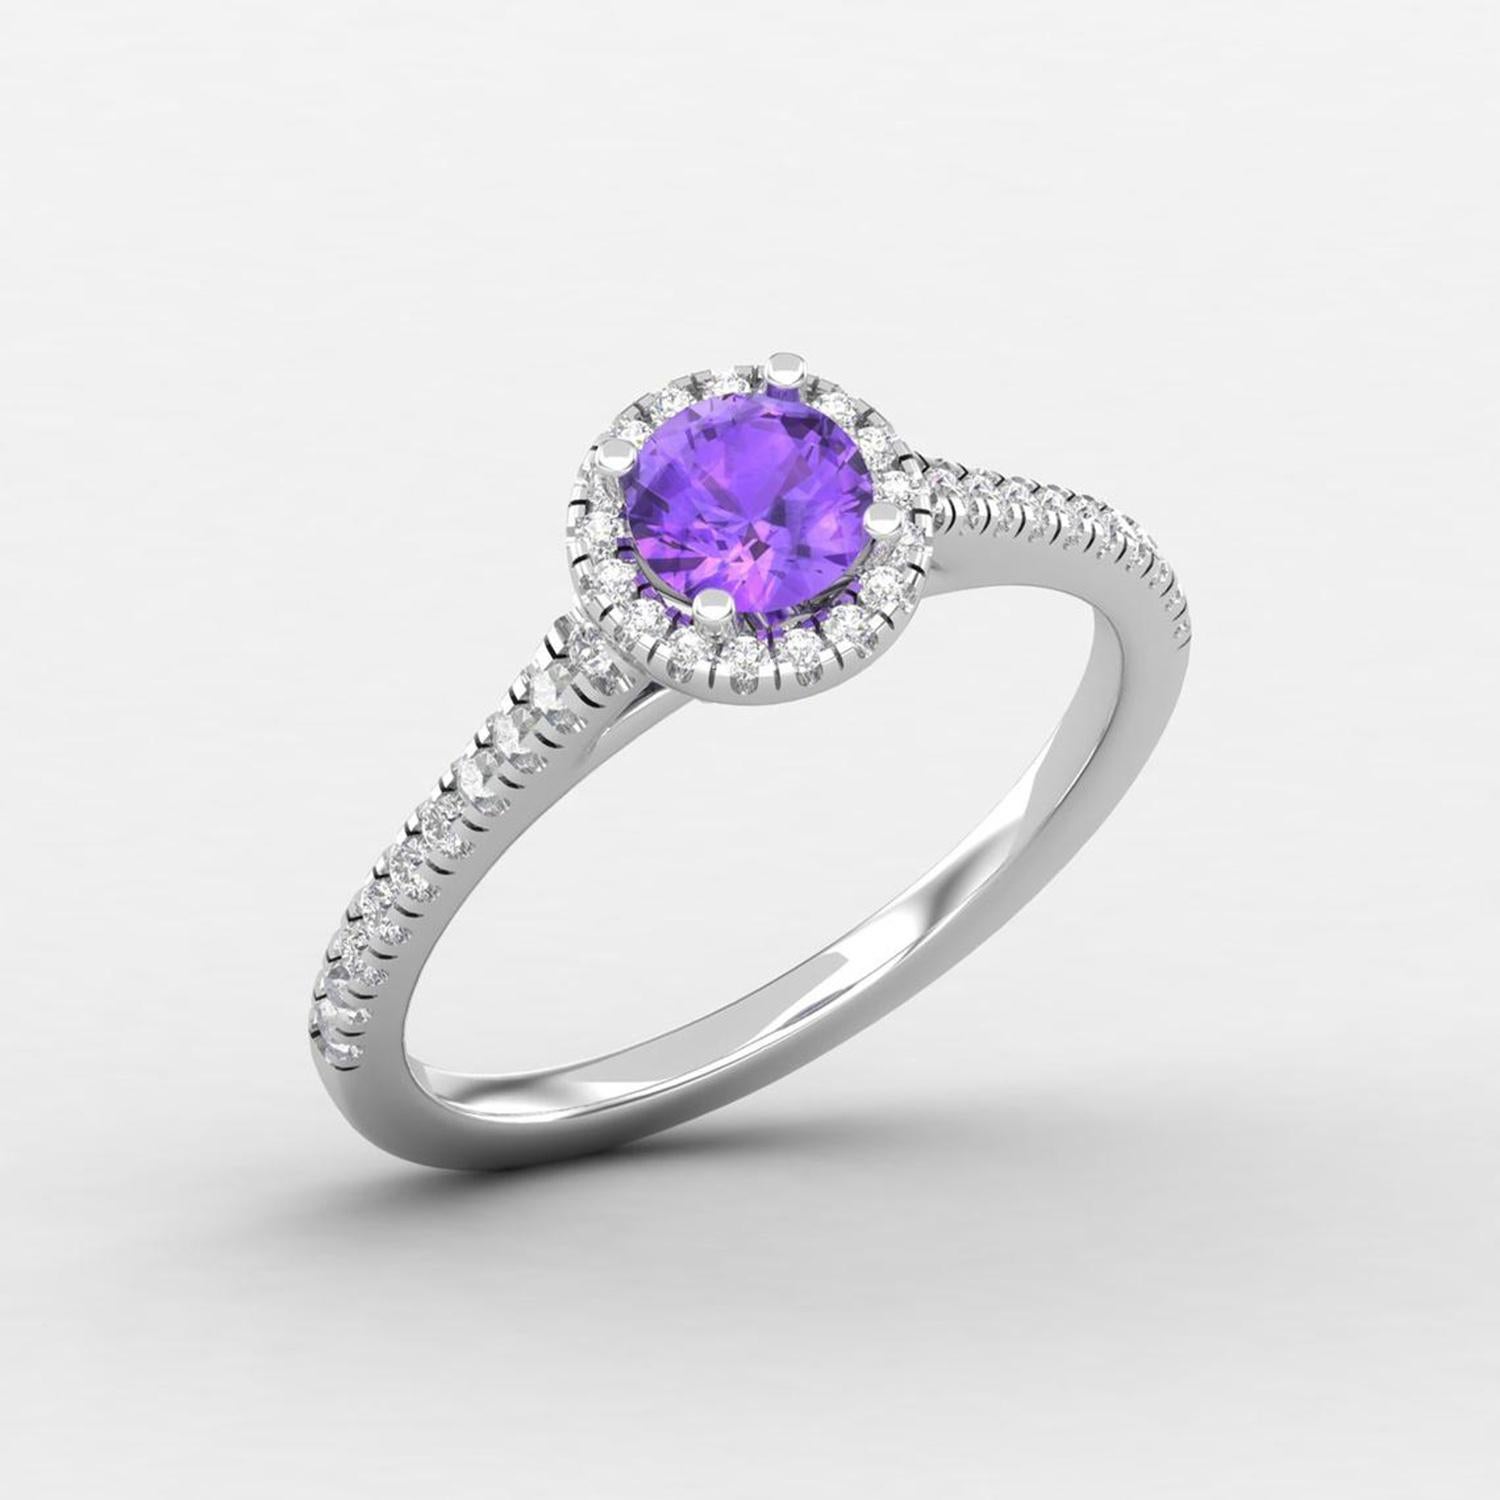 Round Cut 14 K Gold 5mm Amethyst Ring / Diamond Solitaire Ring / Engagement Ring for Her For Sale